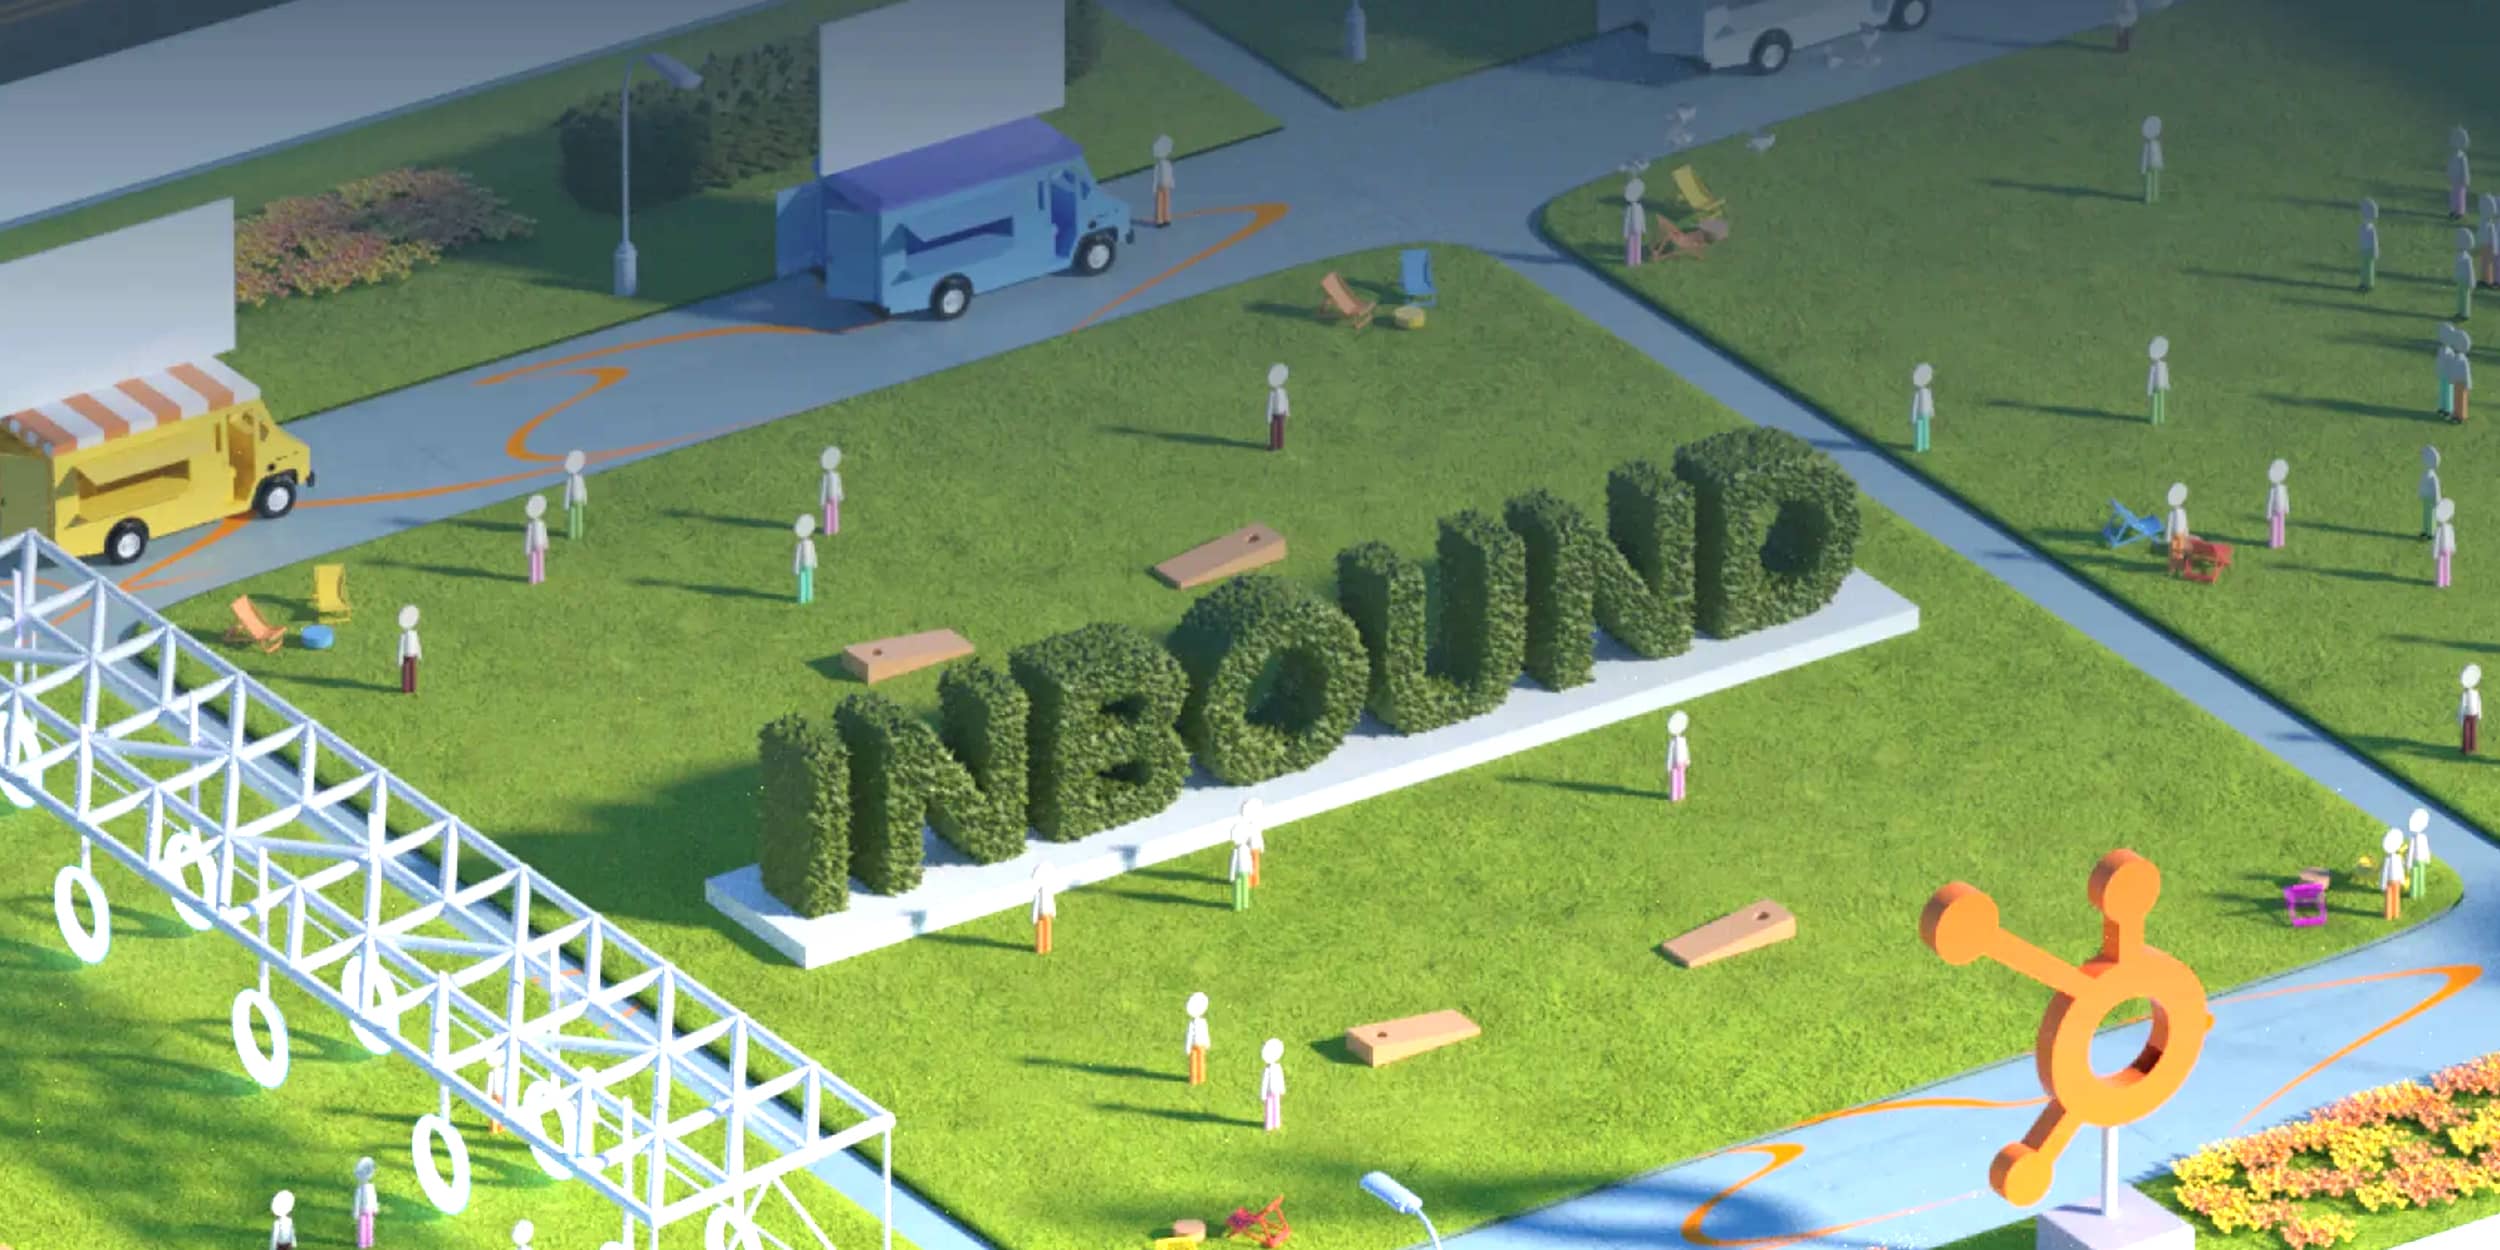 Screenshot from the INBOUND event platform showing a rendering of a grass sculpture that says INBOUND with people surrounding it.